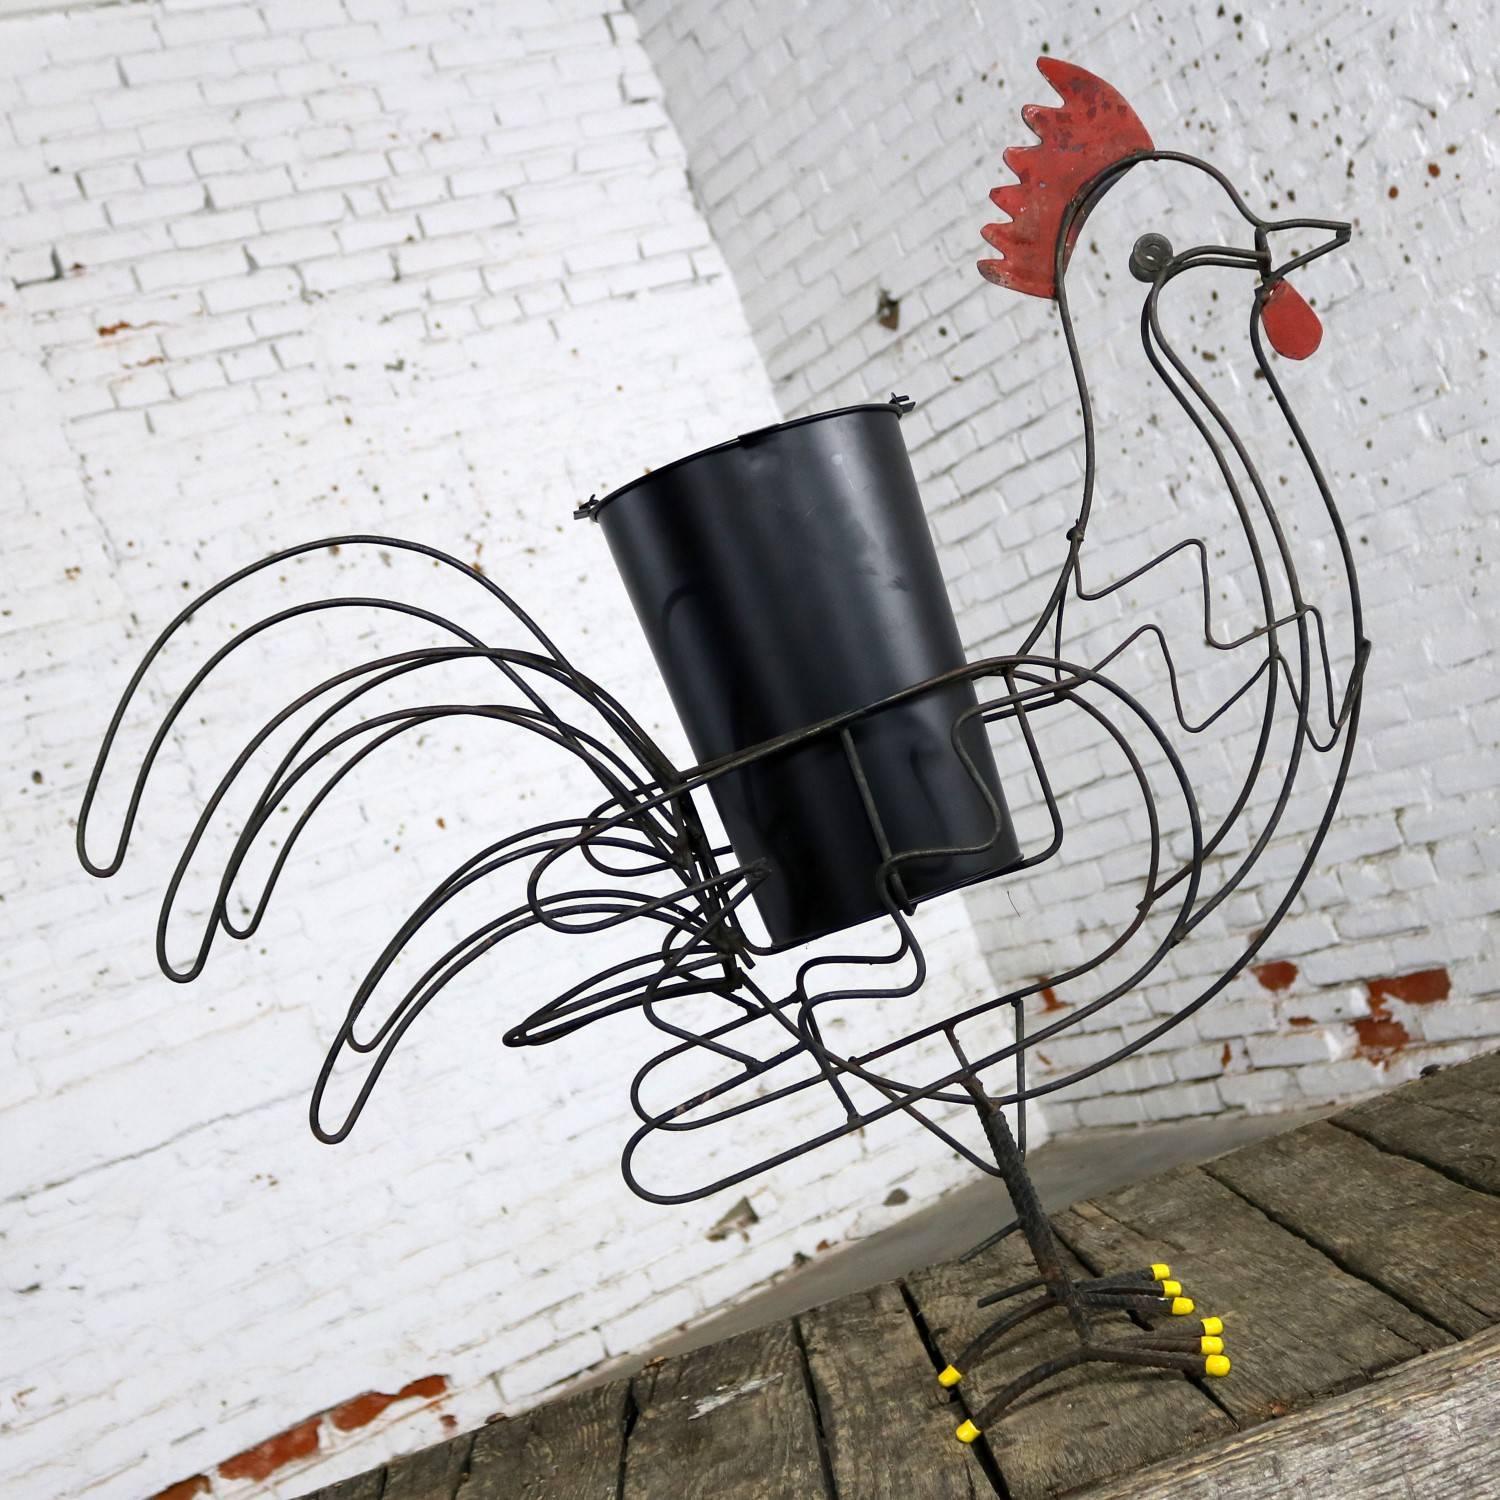 Over-scaled wire rooster planter with a red comb, yellow rubber toes, and a black bucket as planter. It is in purposeful distressed condition, circa 21st century.

This handsome guy is strutting his stuff! He is a quirky rooster planter comprised